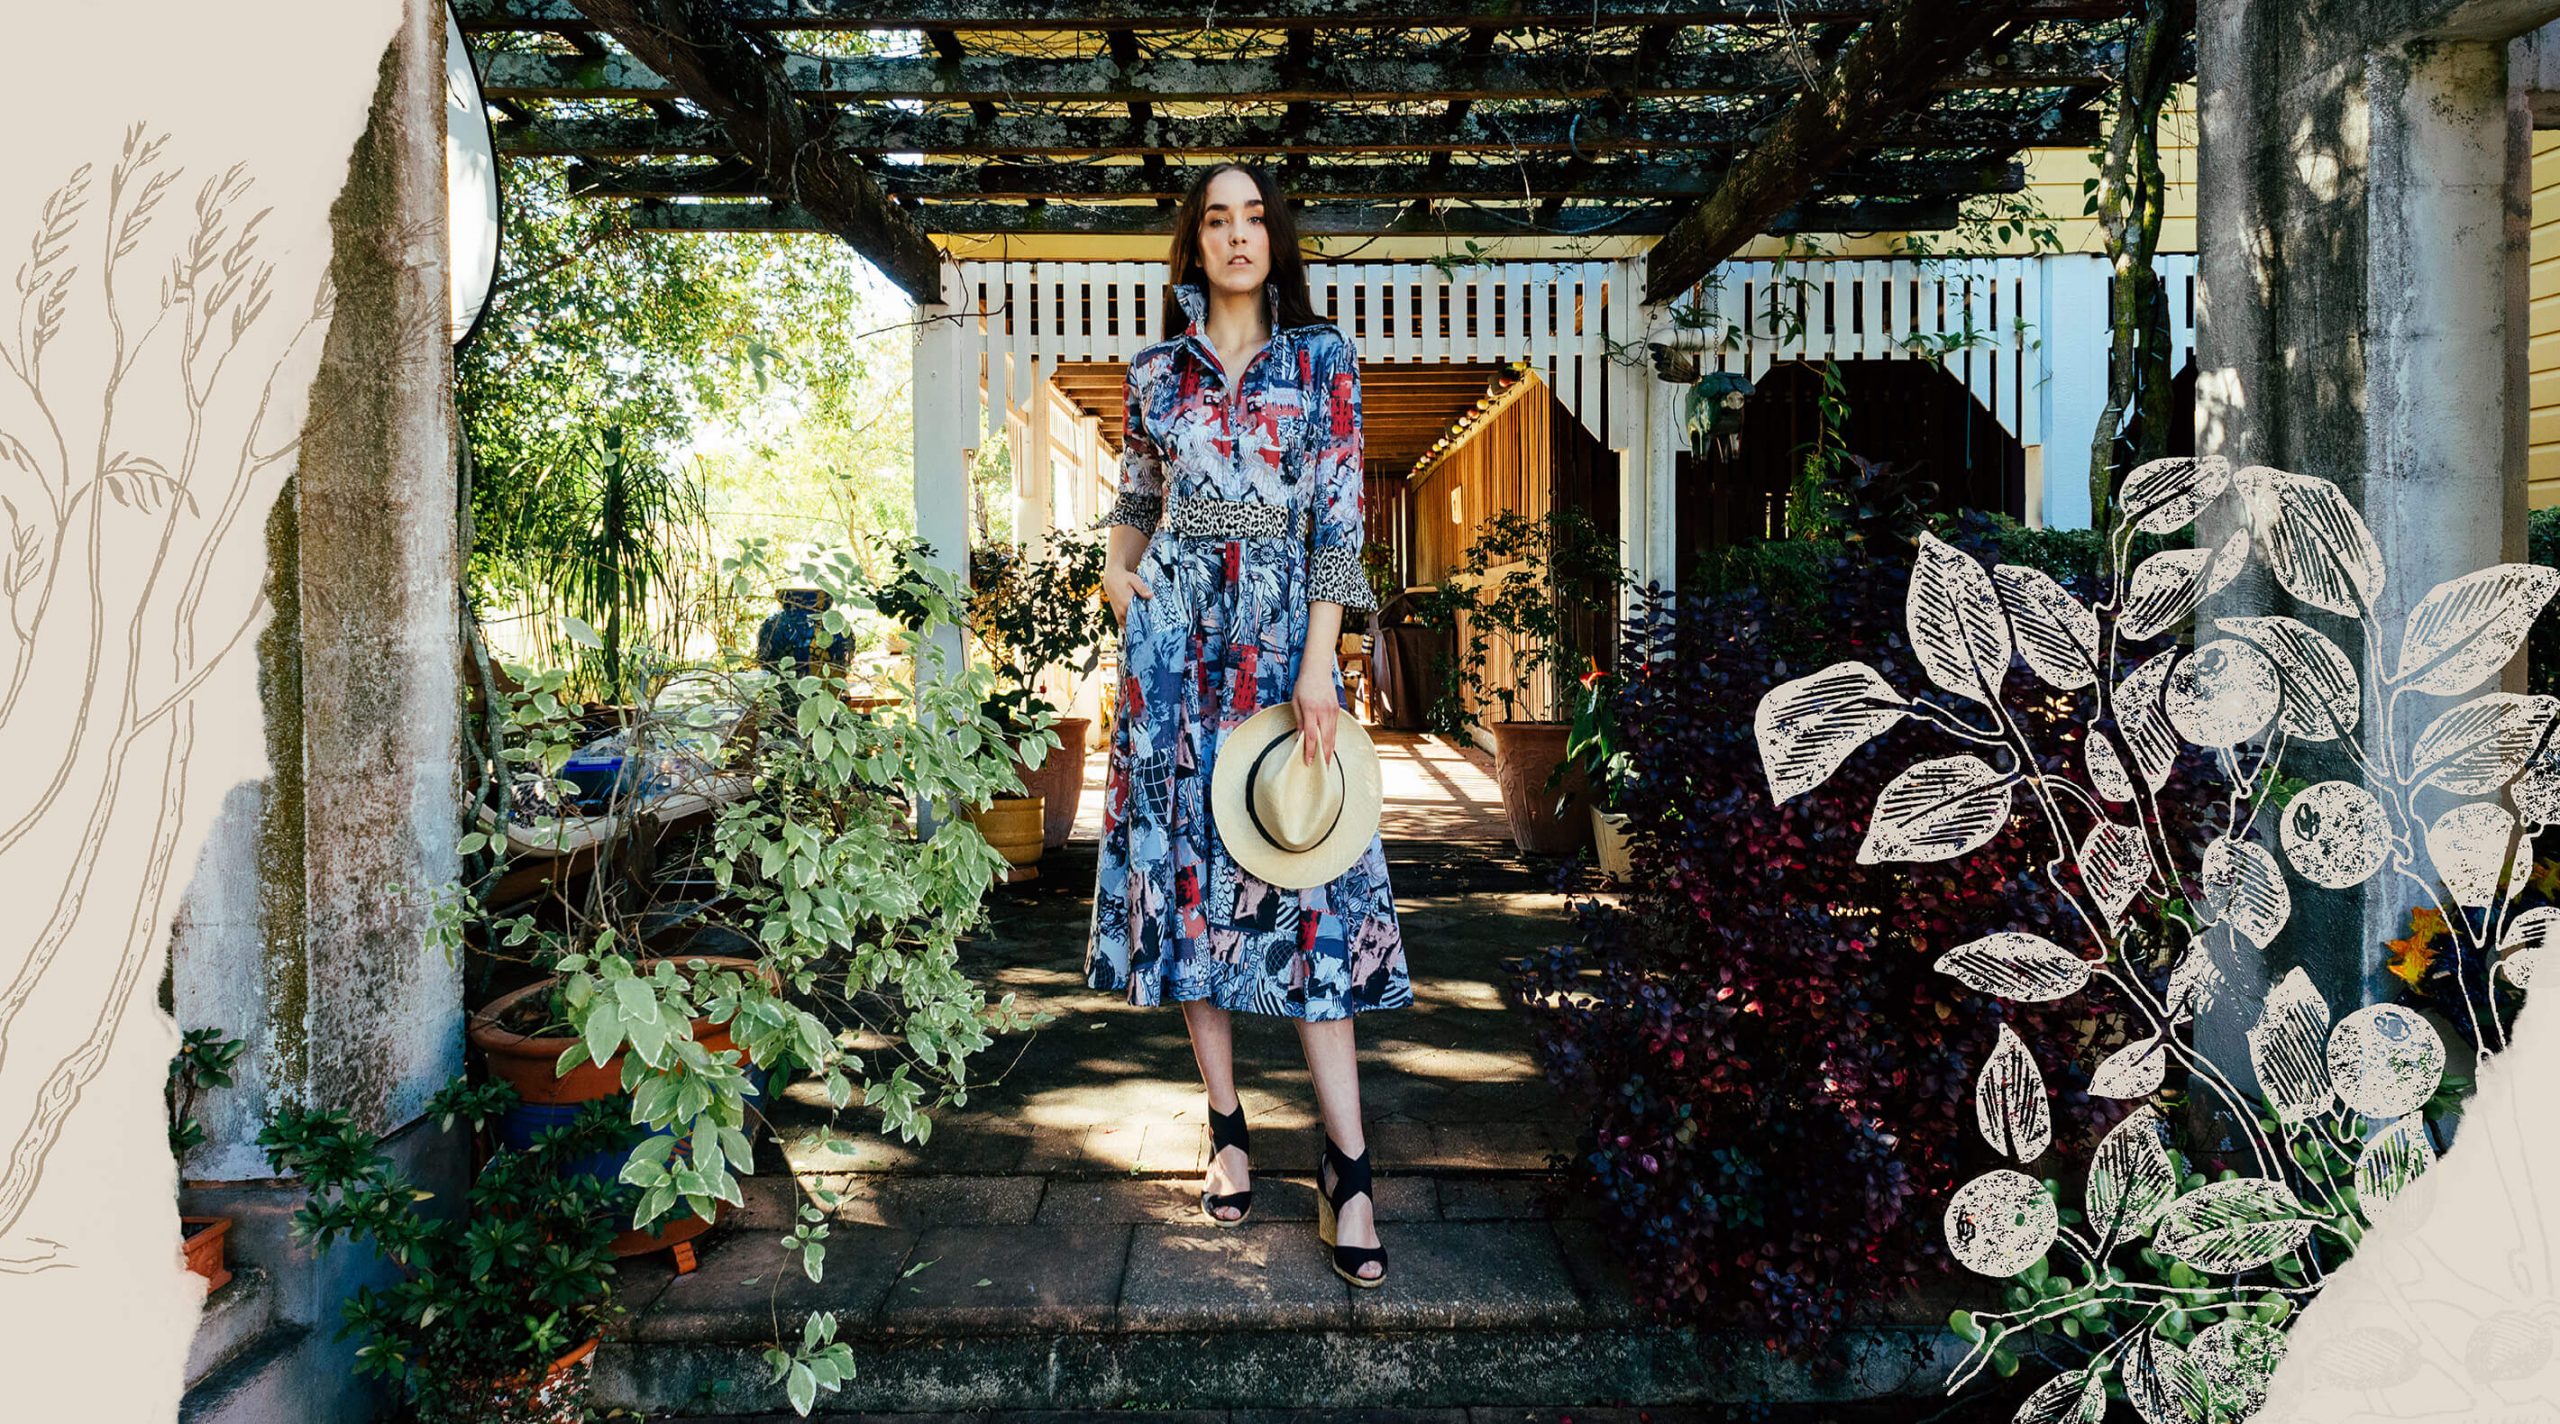 Astille campaign image for Rodin's Garden collection has woman in lush garden in patterned dress with hat